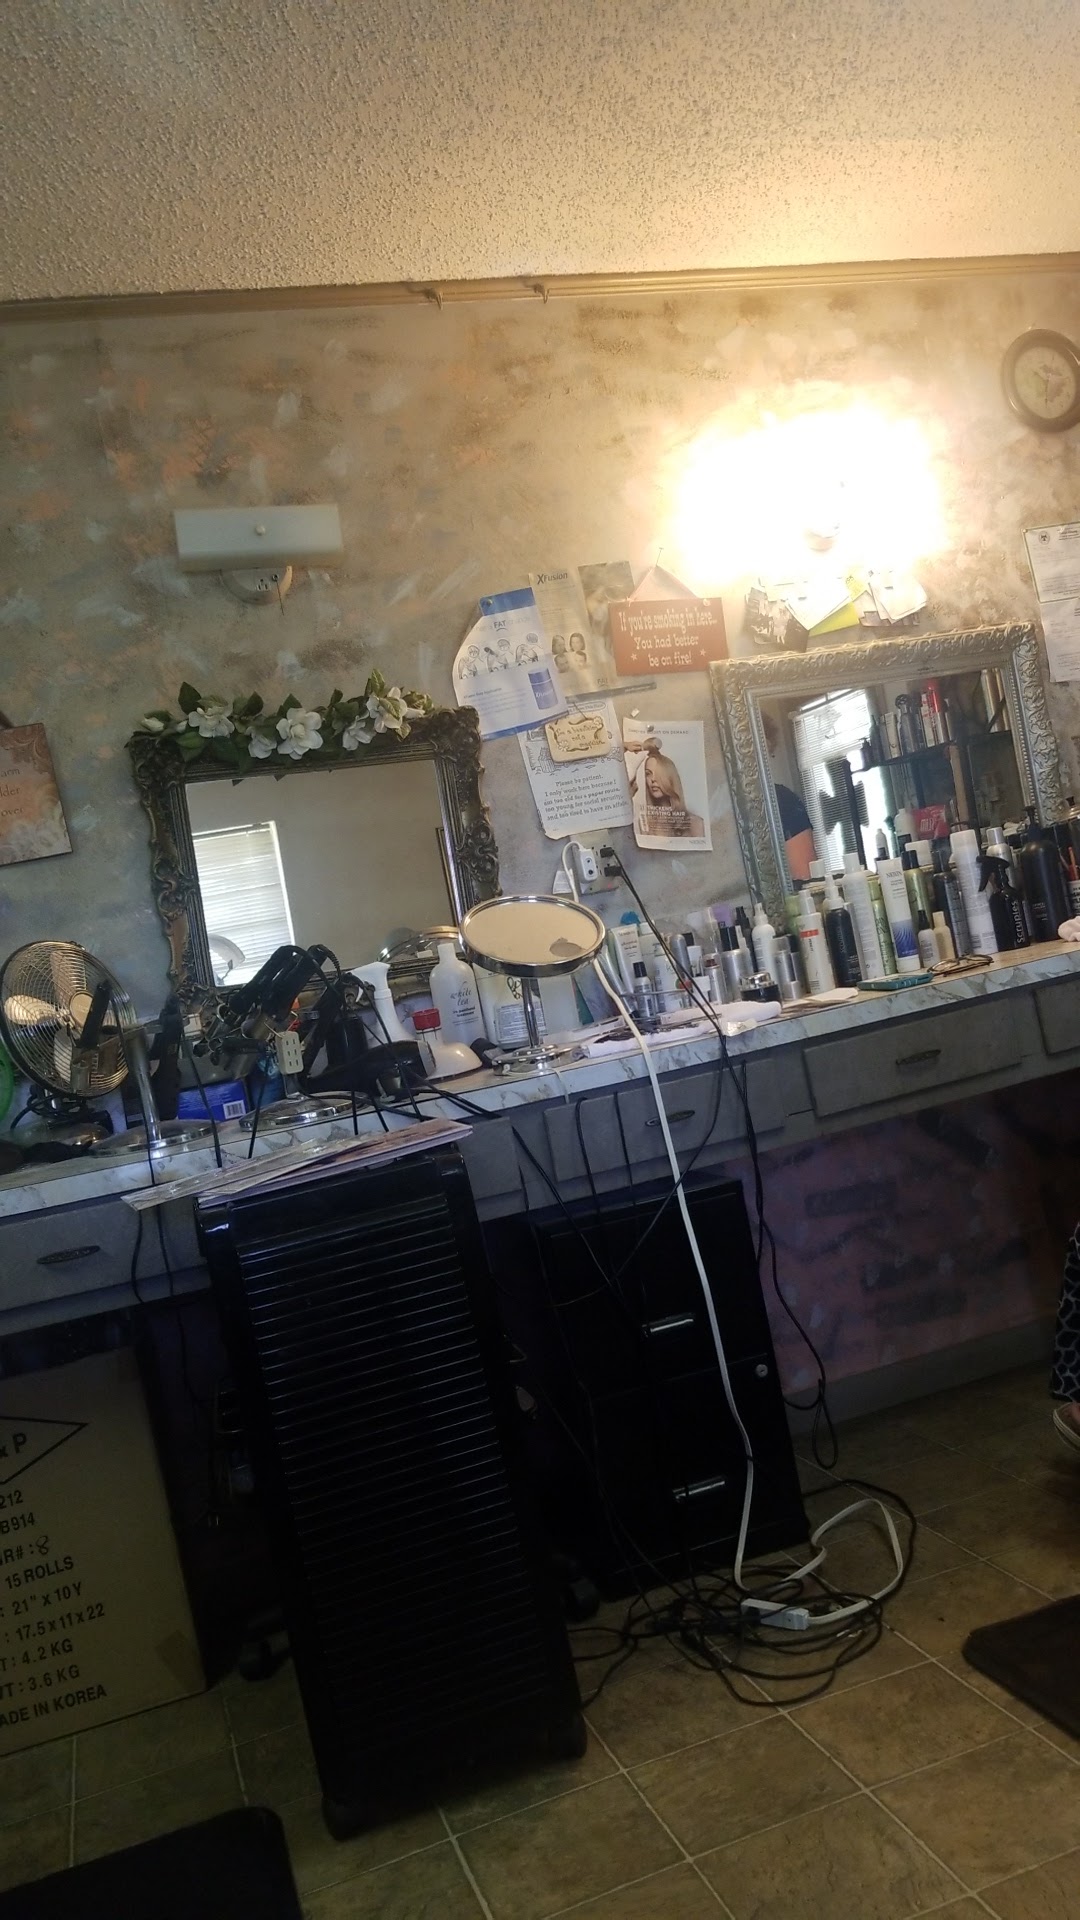 Ann's Beauty Shop 261 Old Mobile Hwy, Lucedale Mississippi 39452